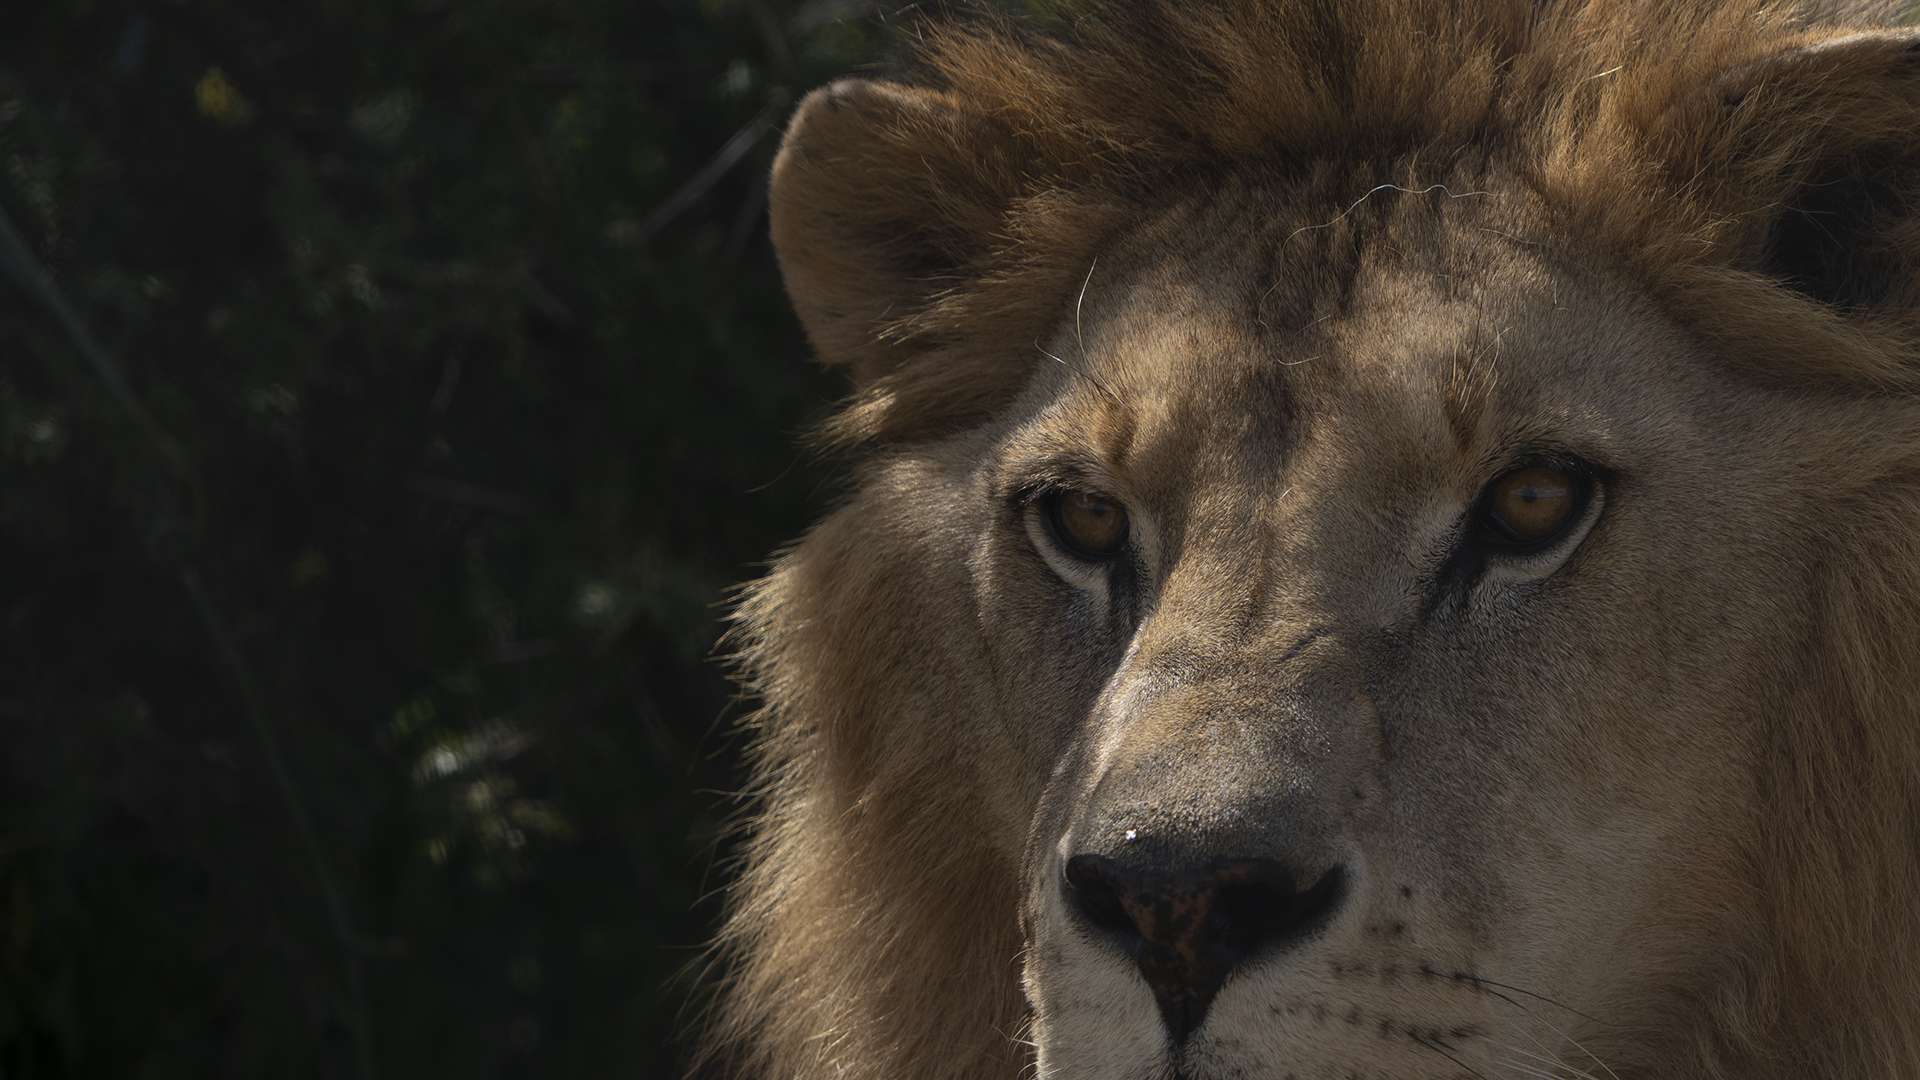 Close up of the eyes and nose of a lion